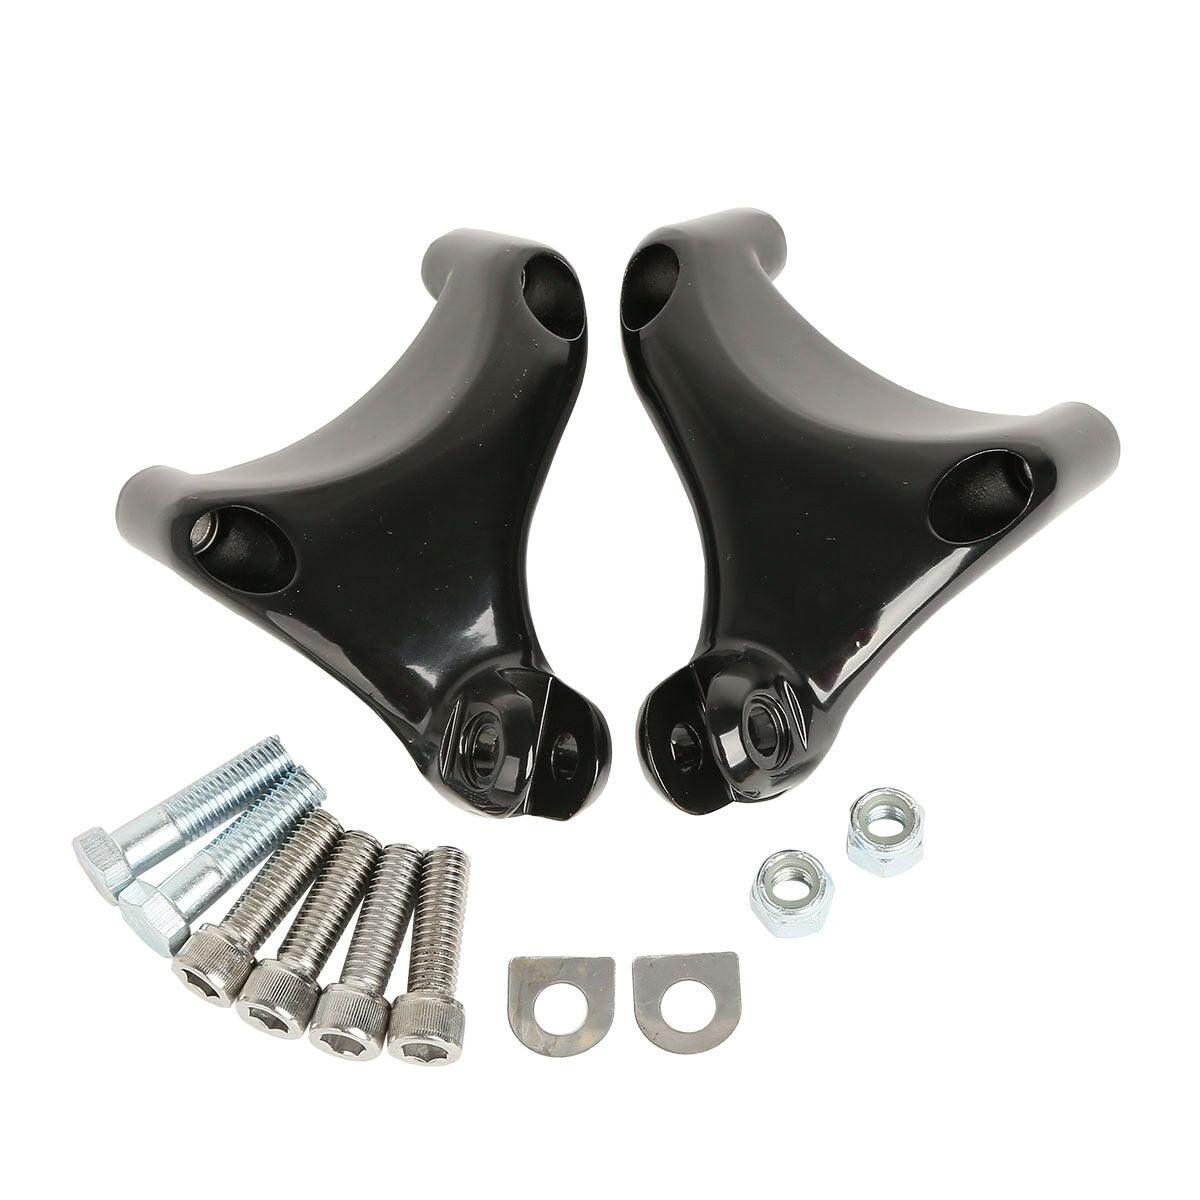 Black Rear Passenger Footpegs Mount Fit For Harley Sportster XL 883 1200 04-13 - Moto Life Products